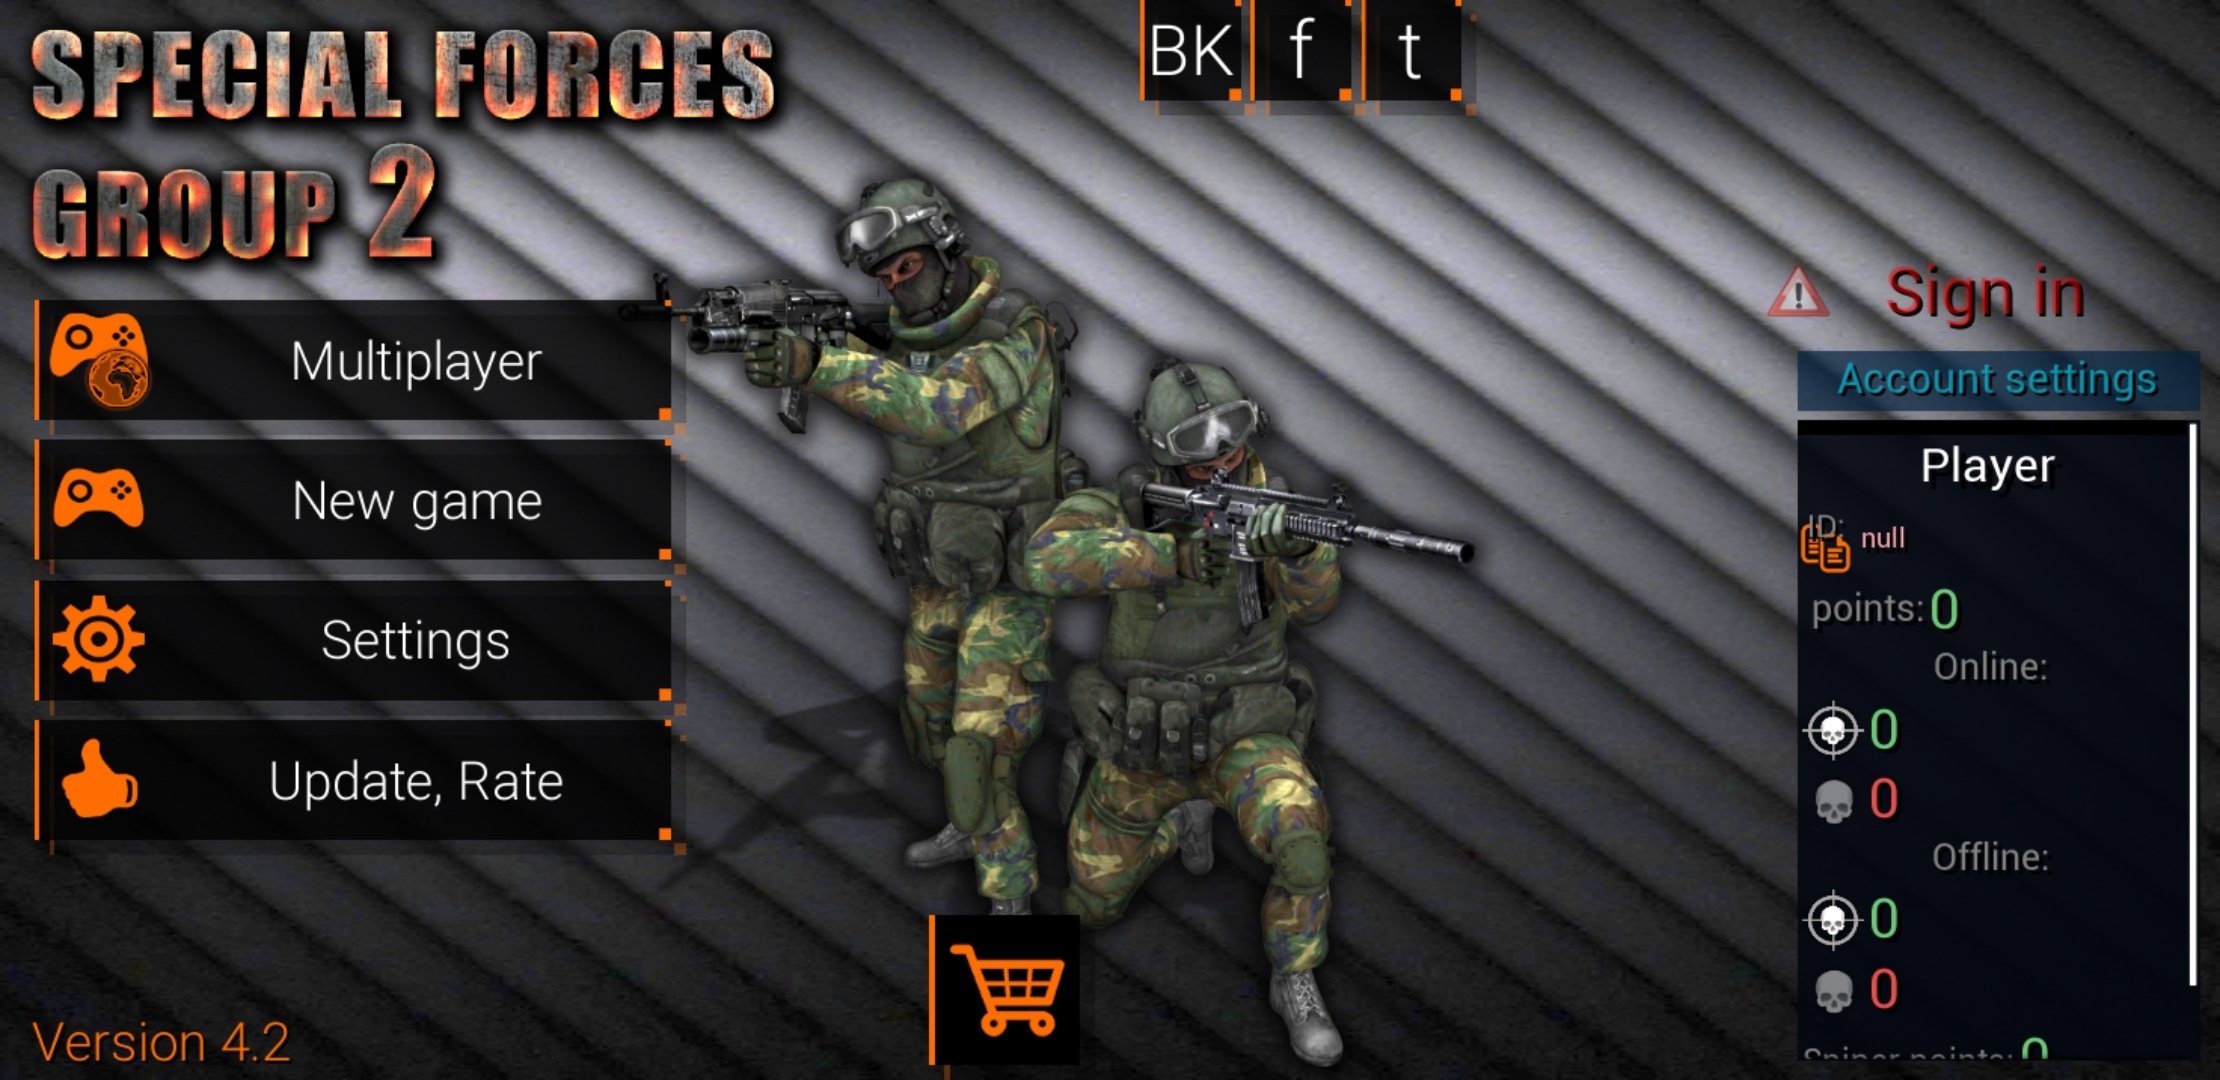 Special Forces Group 2 - Apps on Google Play